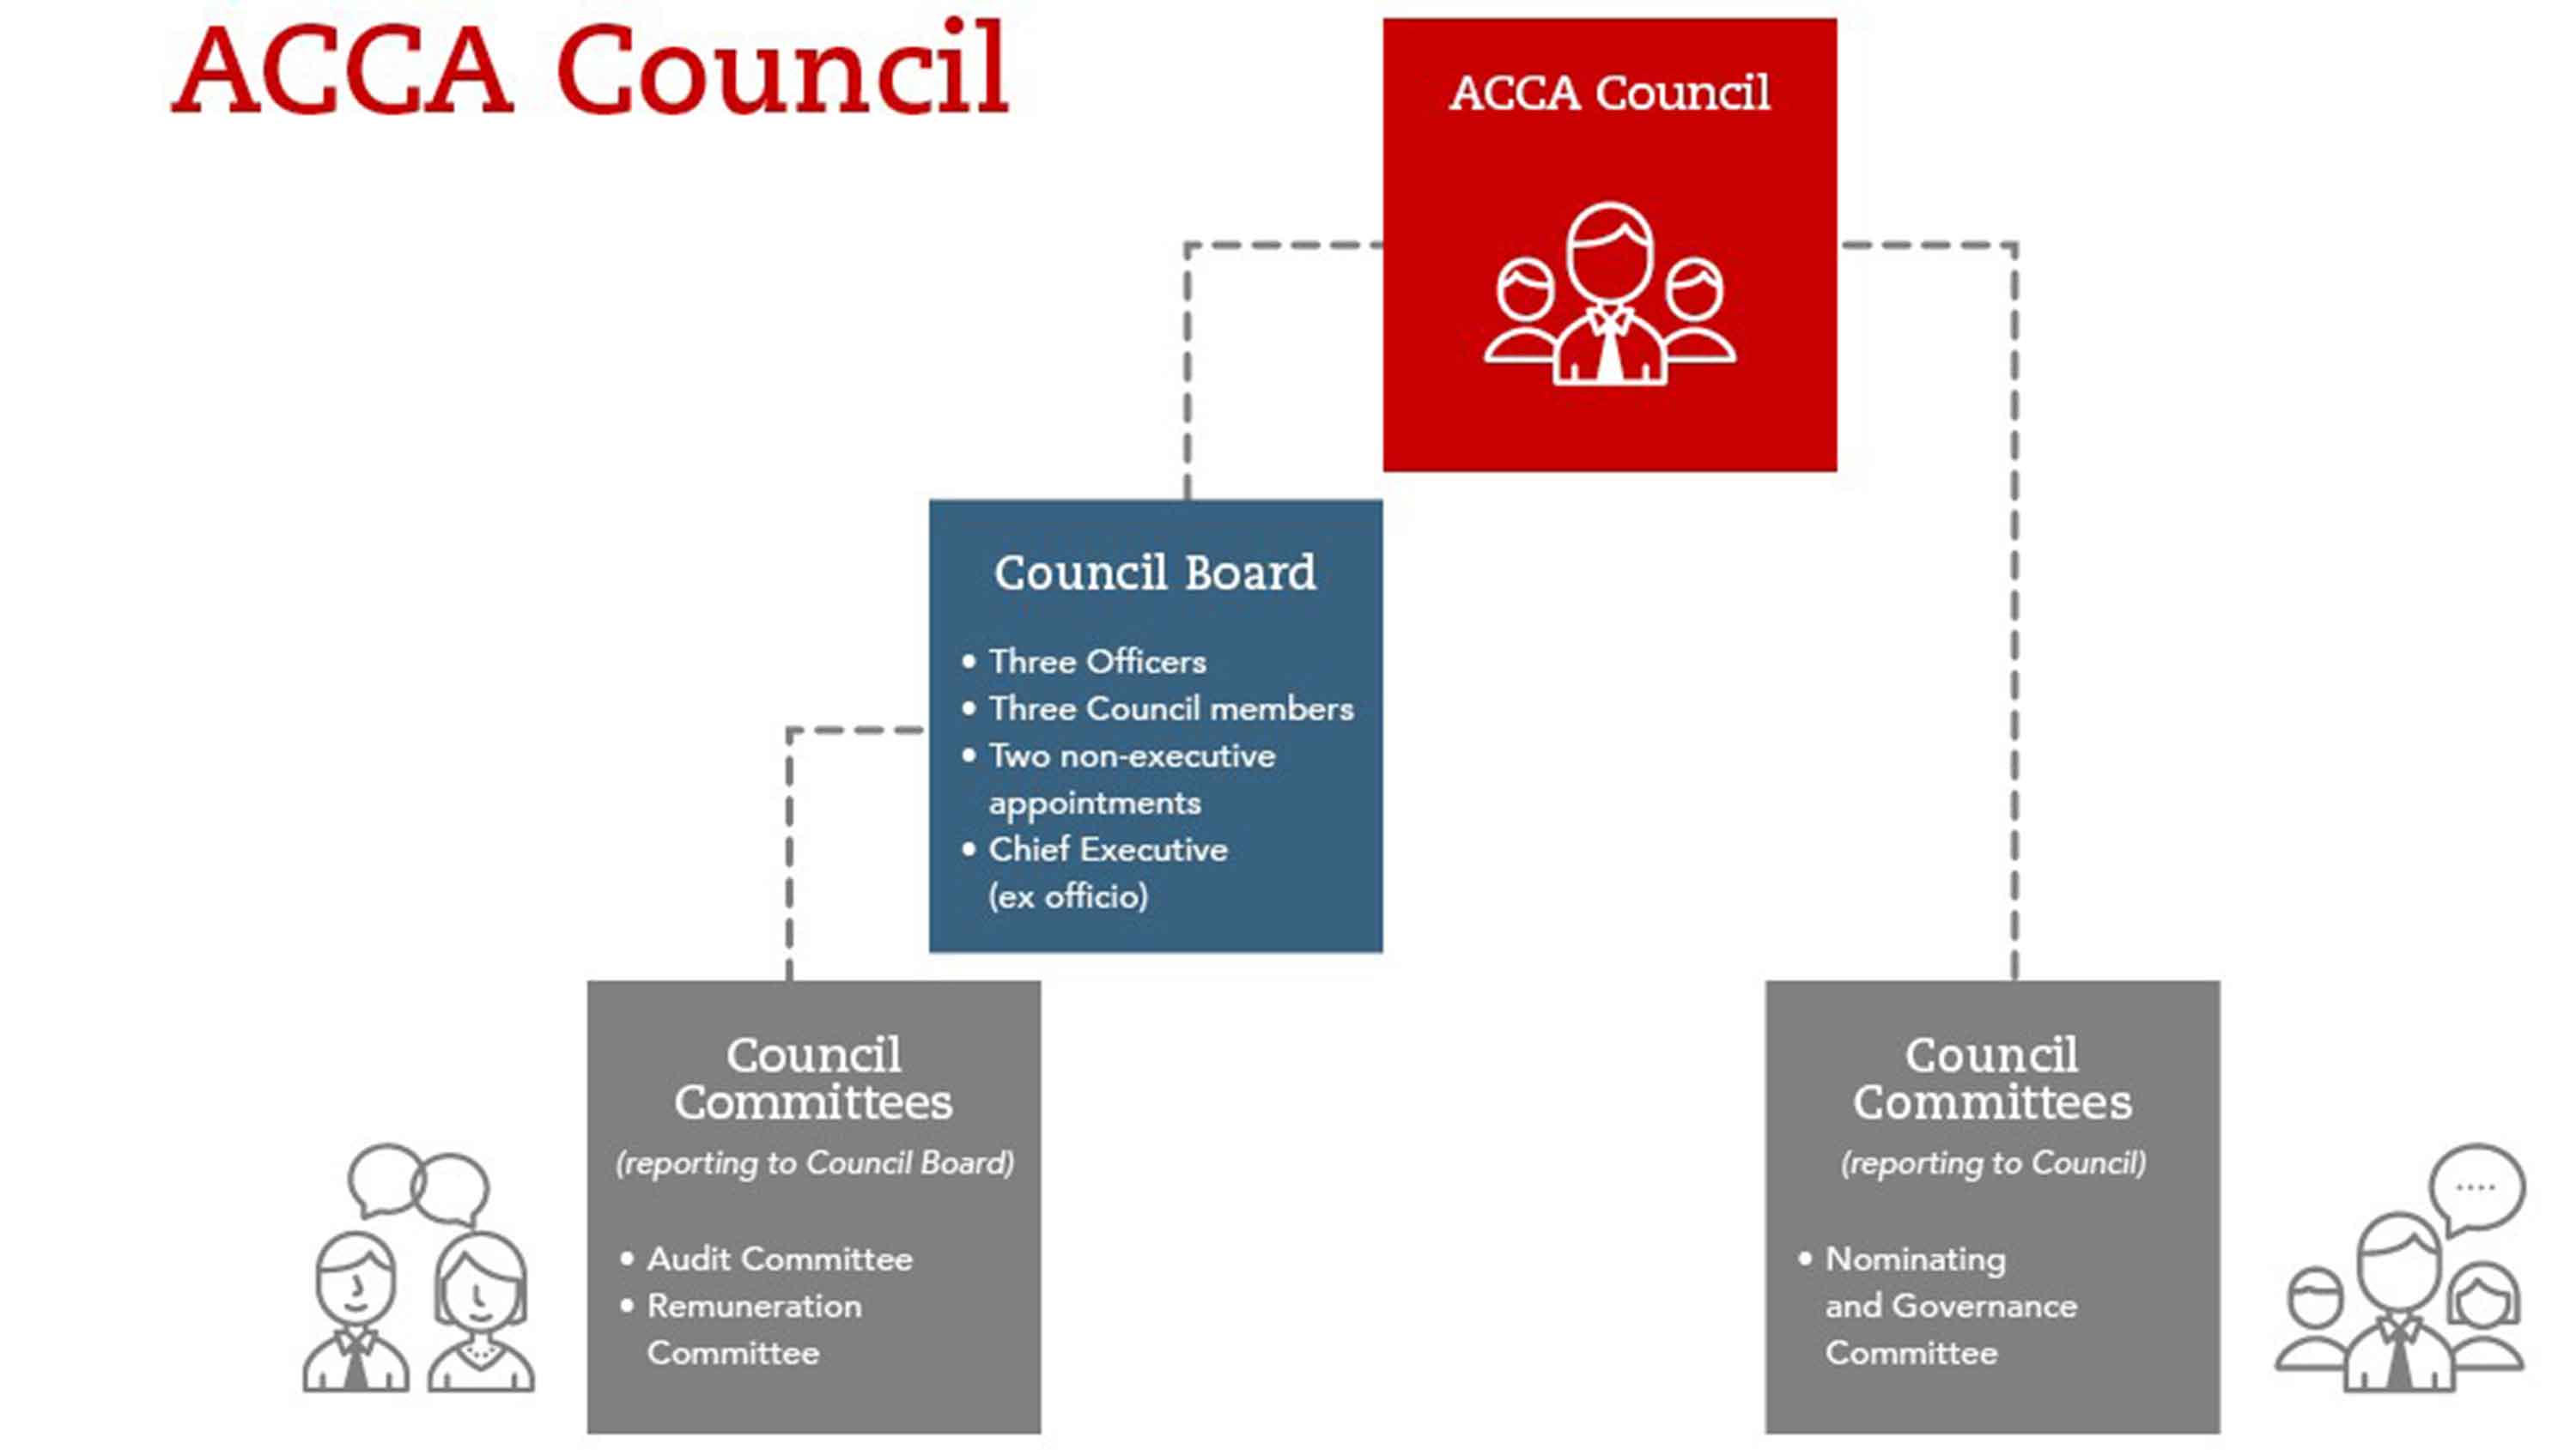 This image shows the structure of ACCA's governing Council. Three sub-groups of Council are (in no particular order): Council Board, consisting of three officers, three Council members, two non-executive appointments and Chief executive (ex officio).  Council Committees (reporting to Council Board), consisting of the Audit committee and Remuneration committee, and the final group Council Committees, reporting to Council, and consisting of the Nominating and Governance committee.